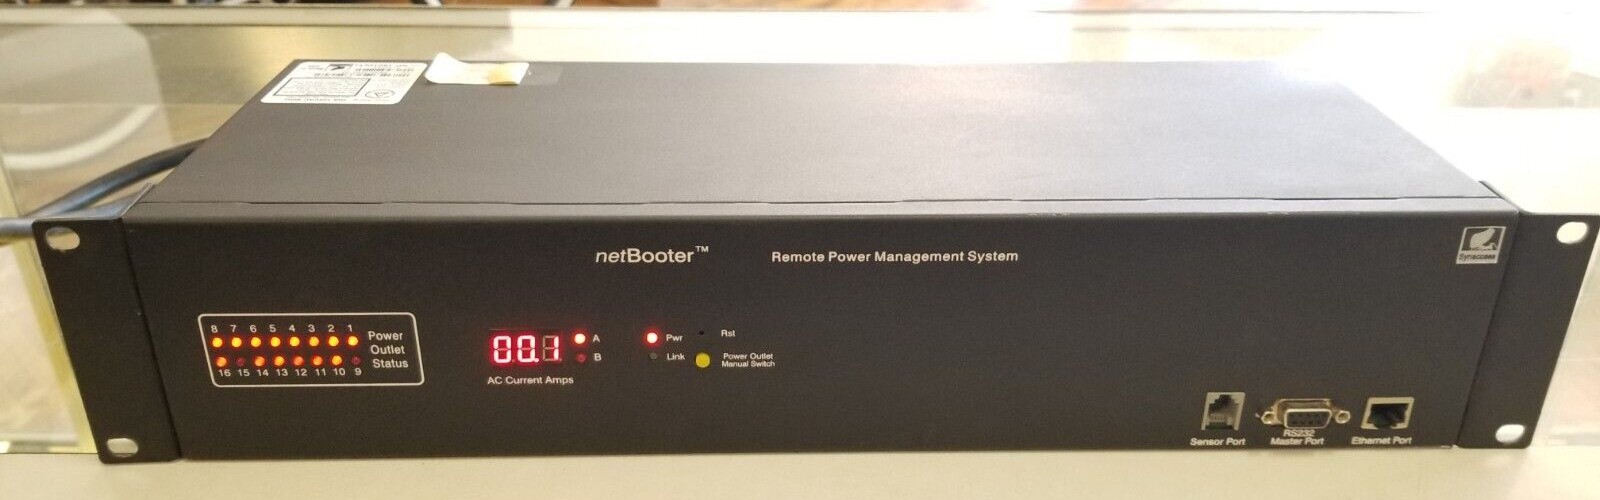 Synaccess Np-1601d(t)  Netbooter 16-port Remote Power Management System